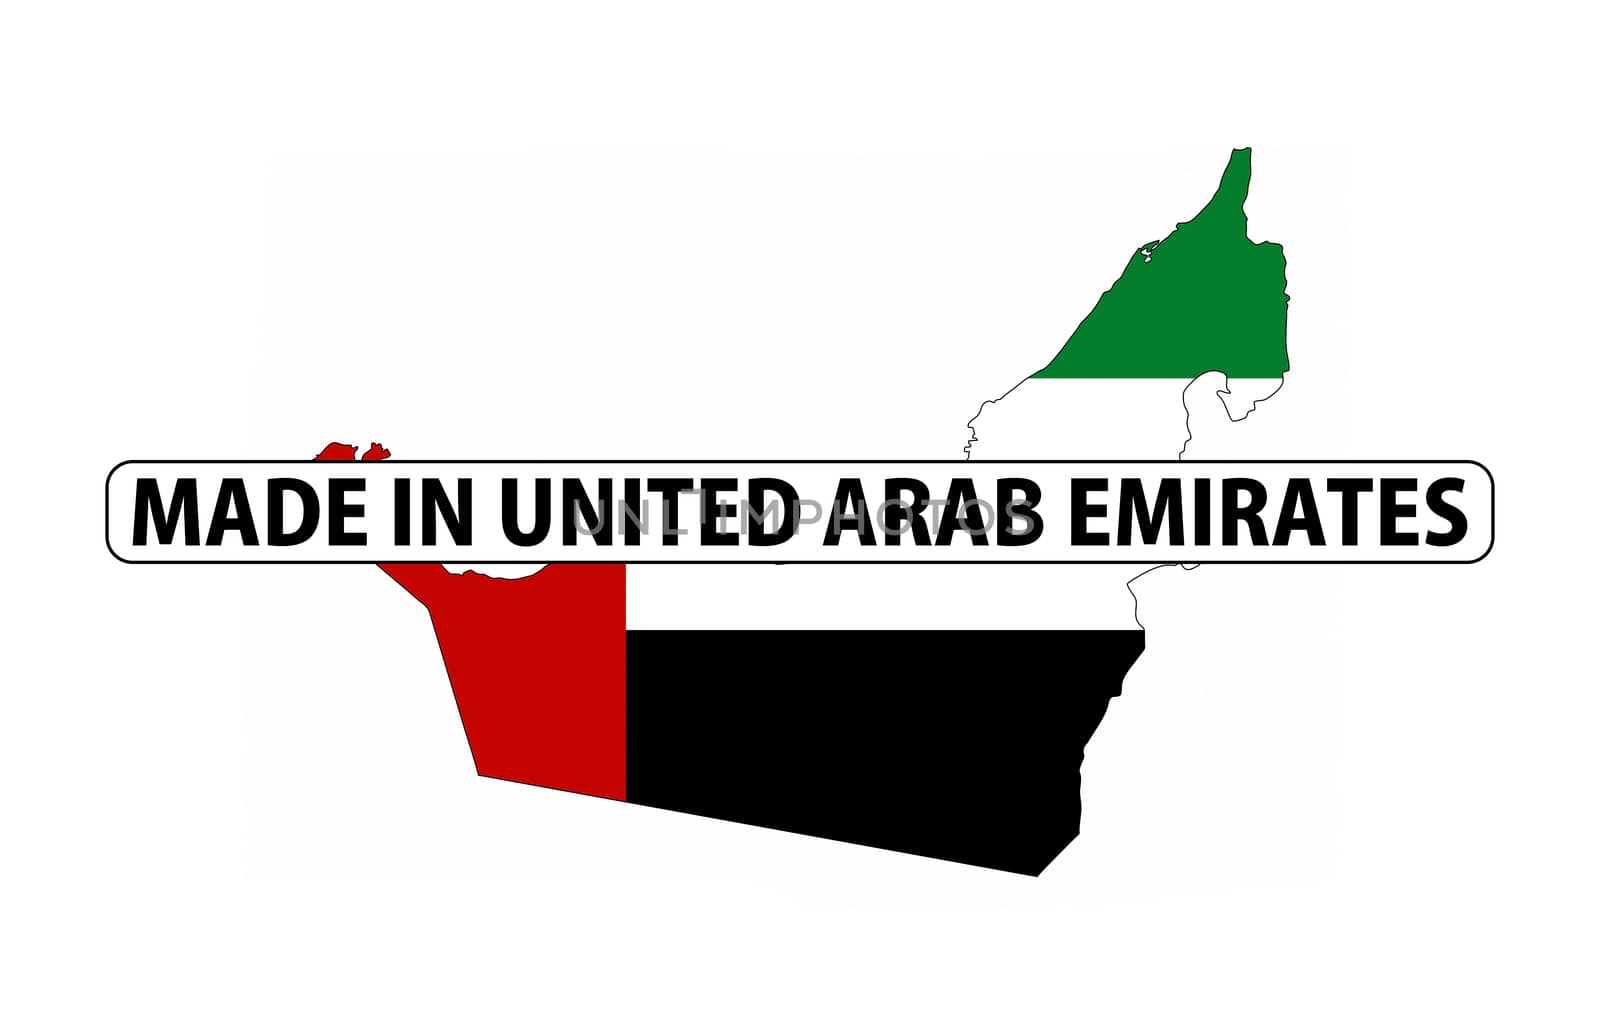 made in united arab emirates country national flag map shape with text